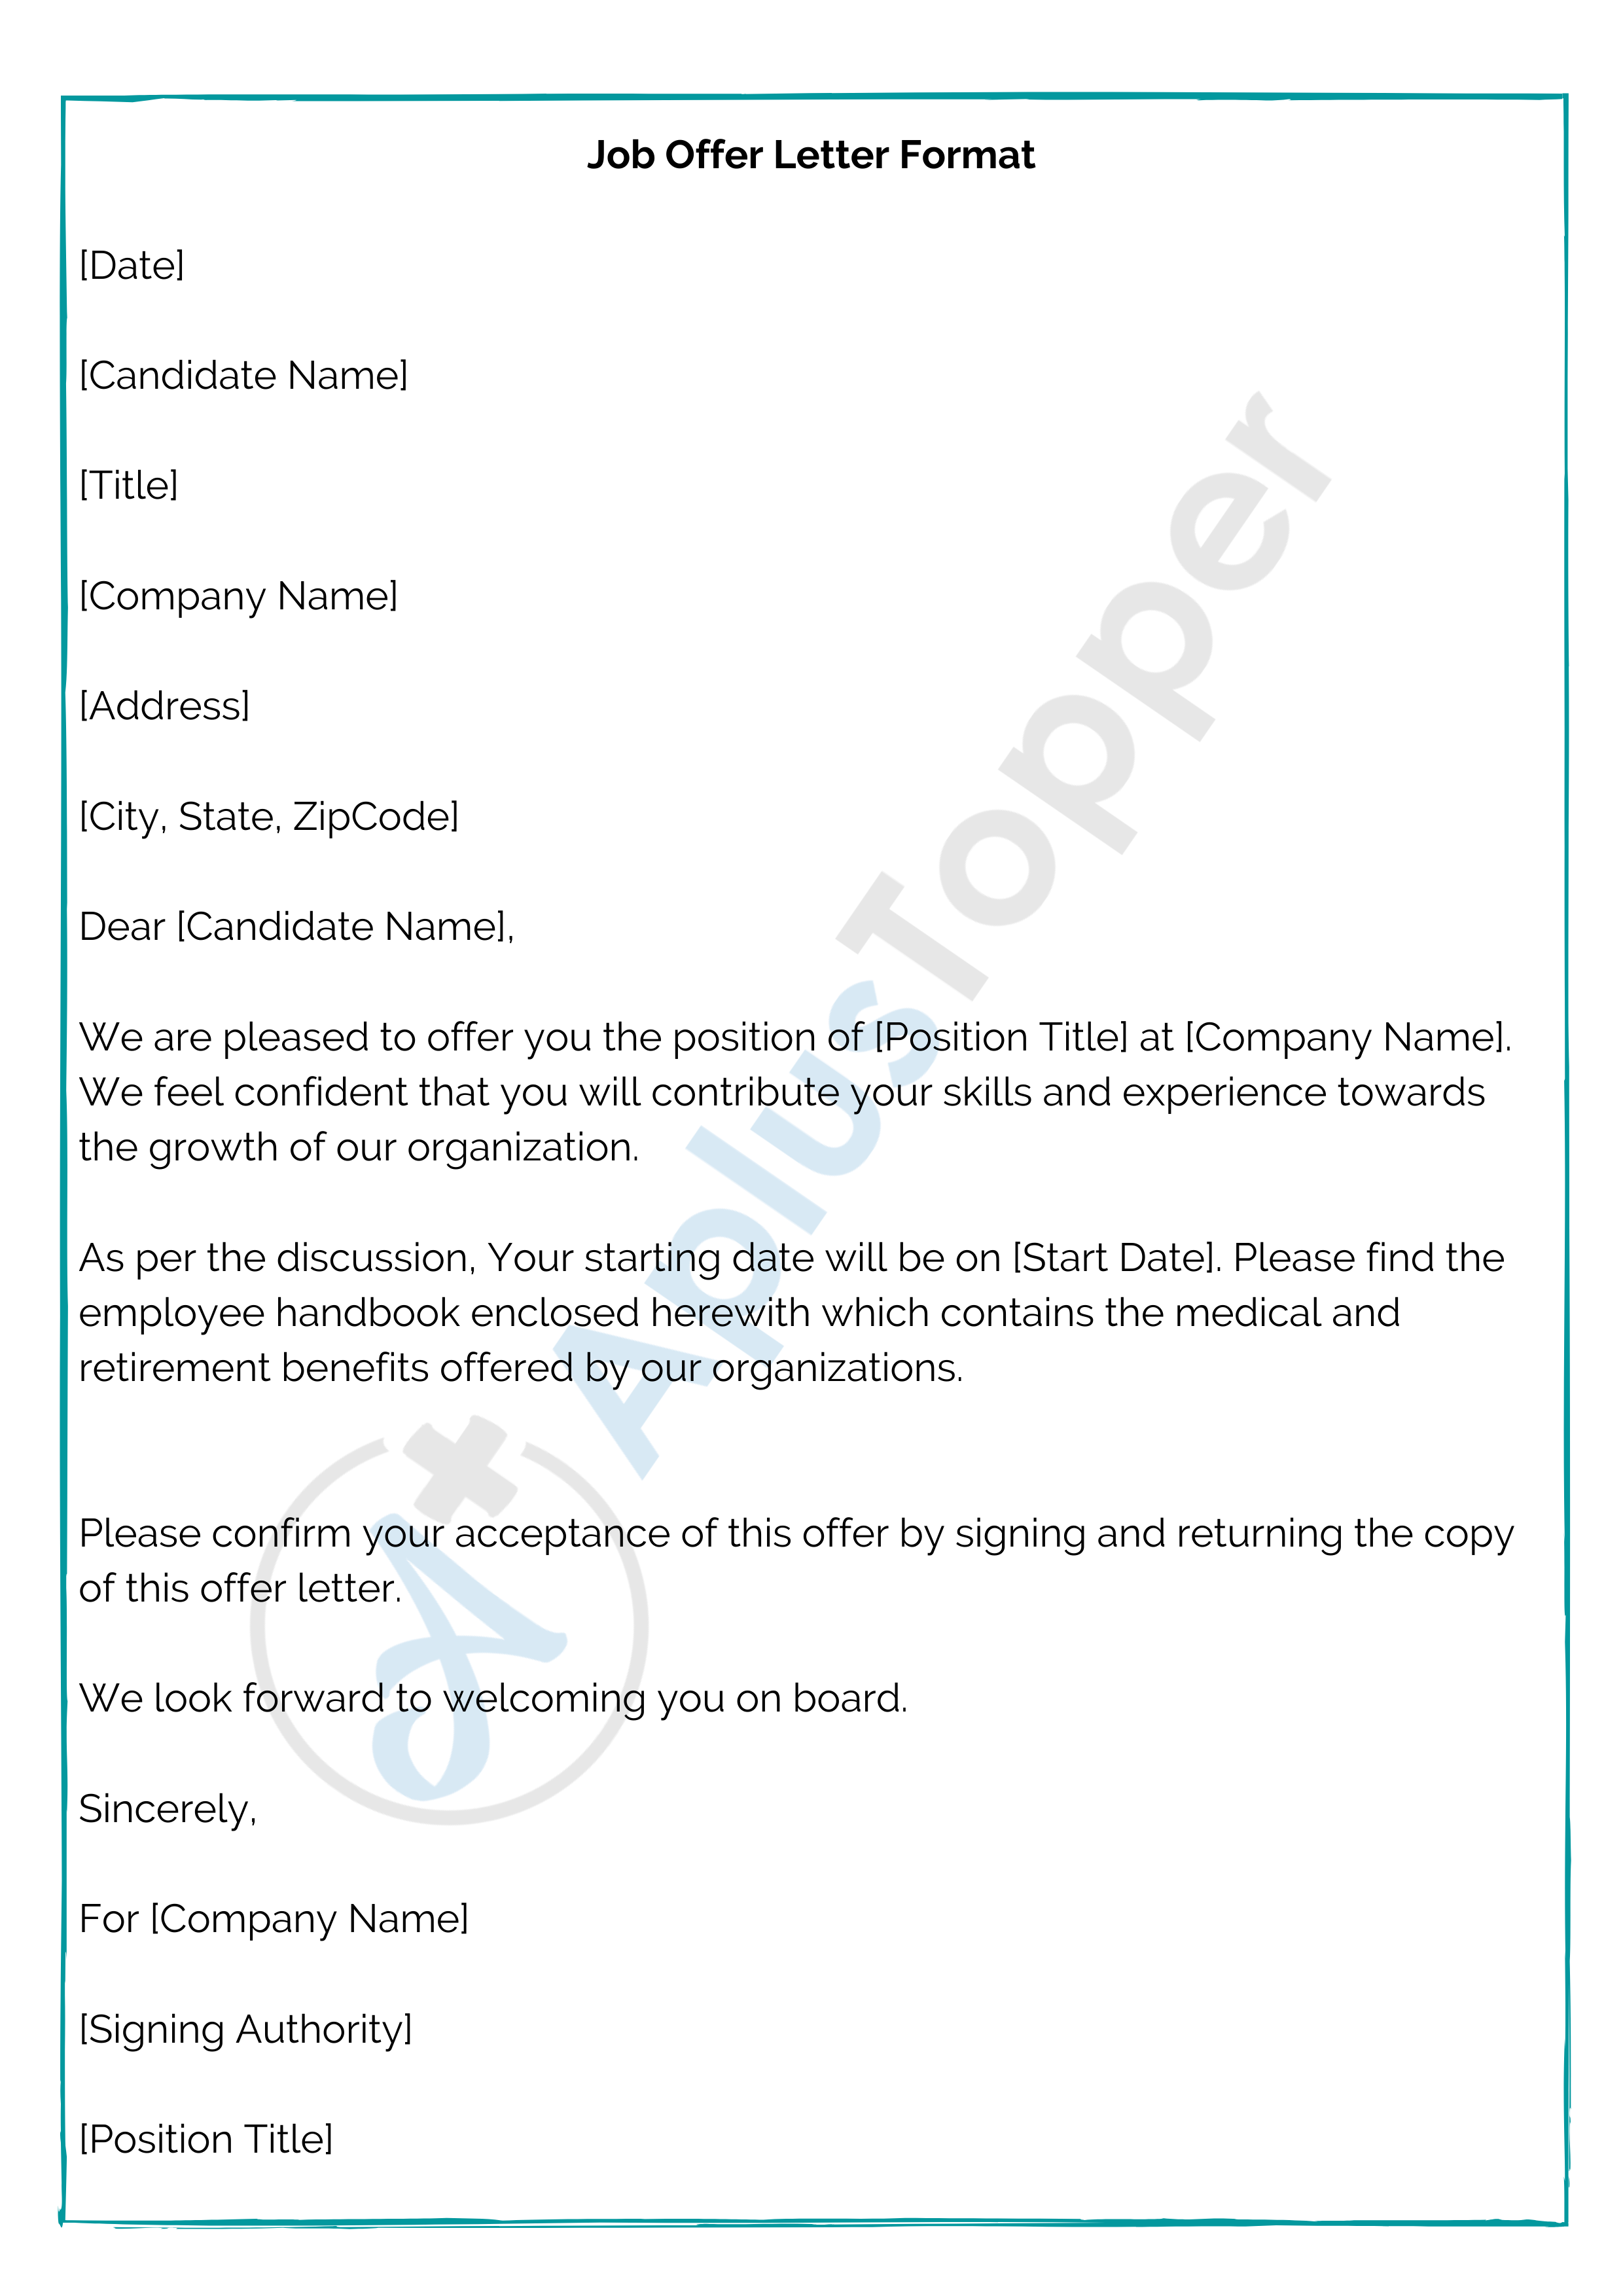 best-of-the-best-info-about-employee-offer-letter-format-in-word-resume